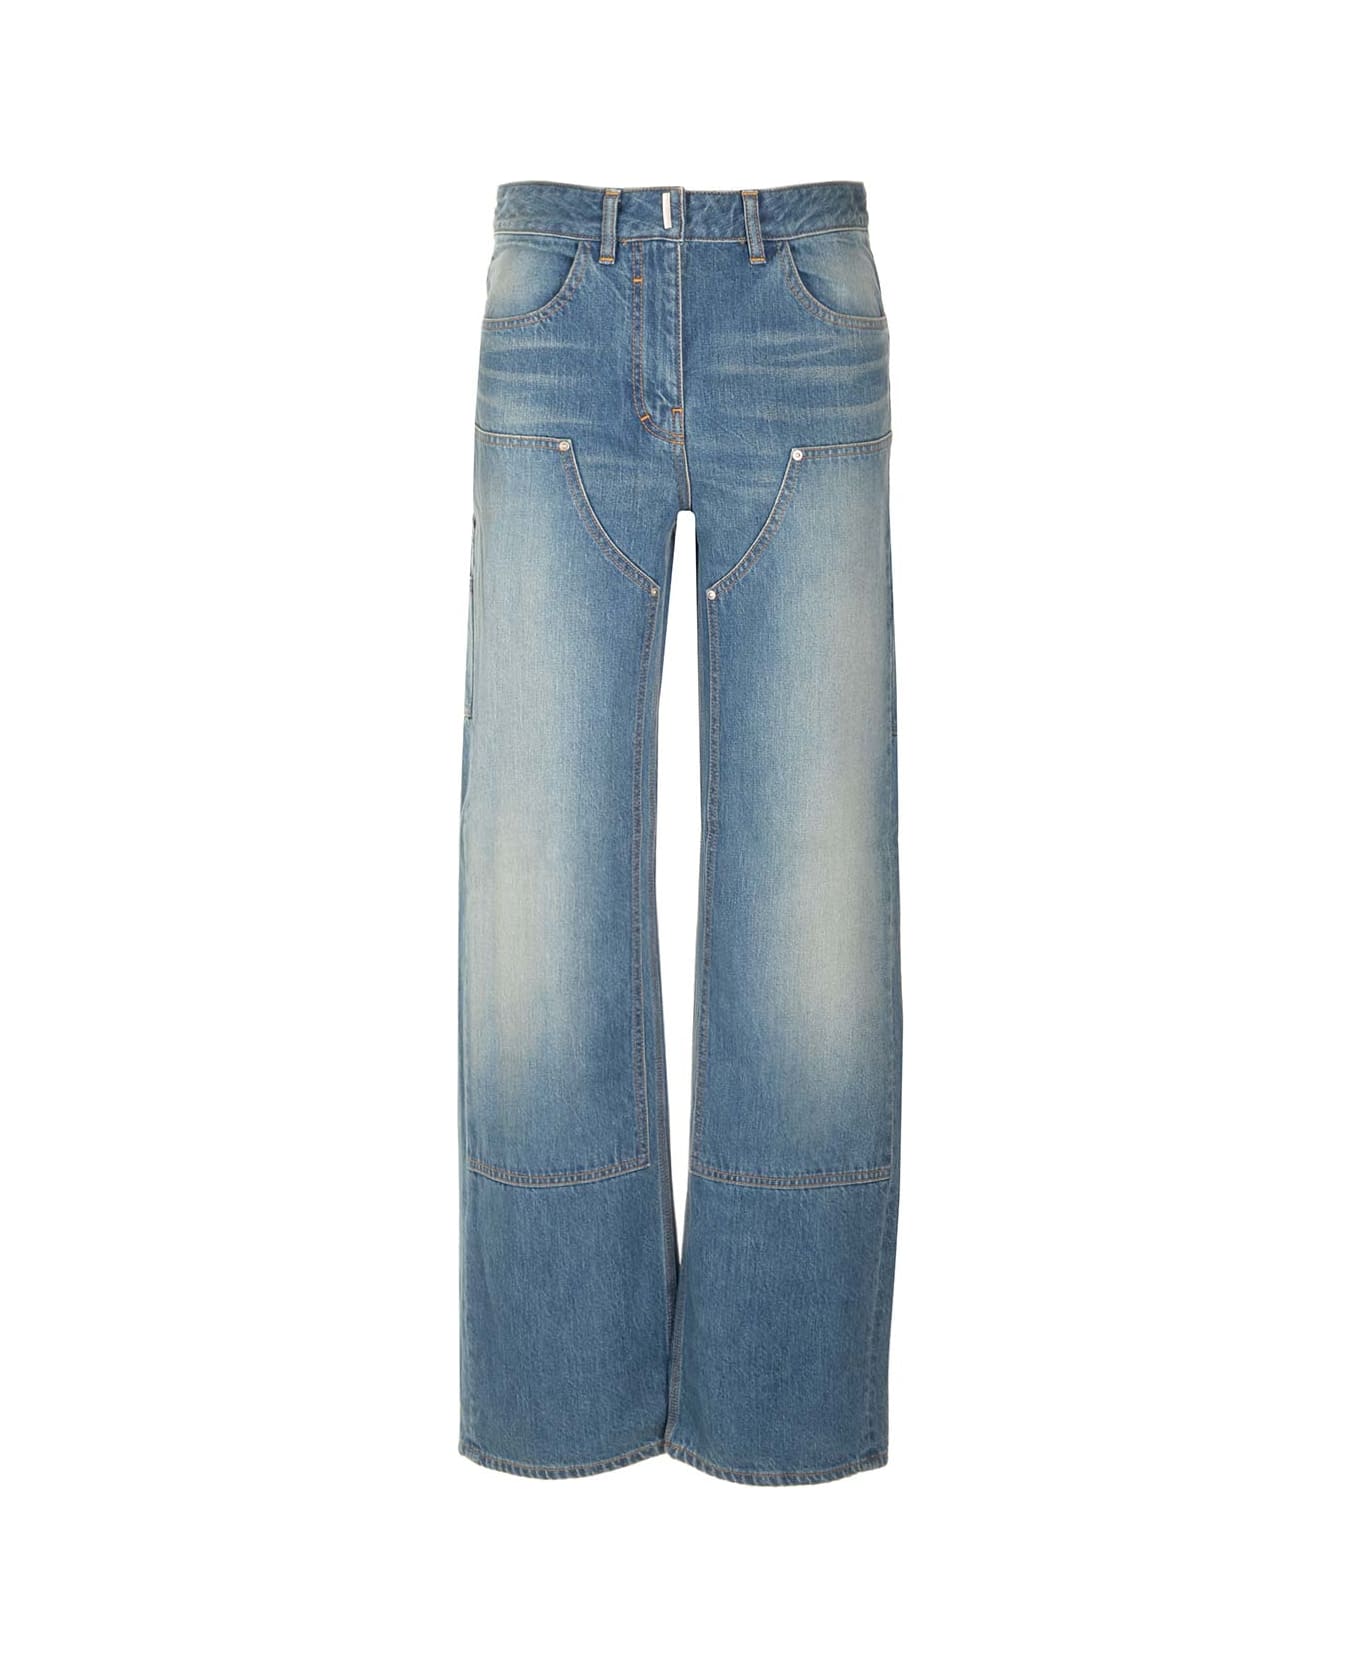 Givenchy Shoes Full Length Jeans - Deep Blue